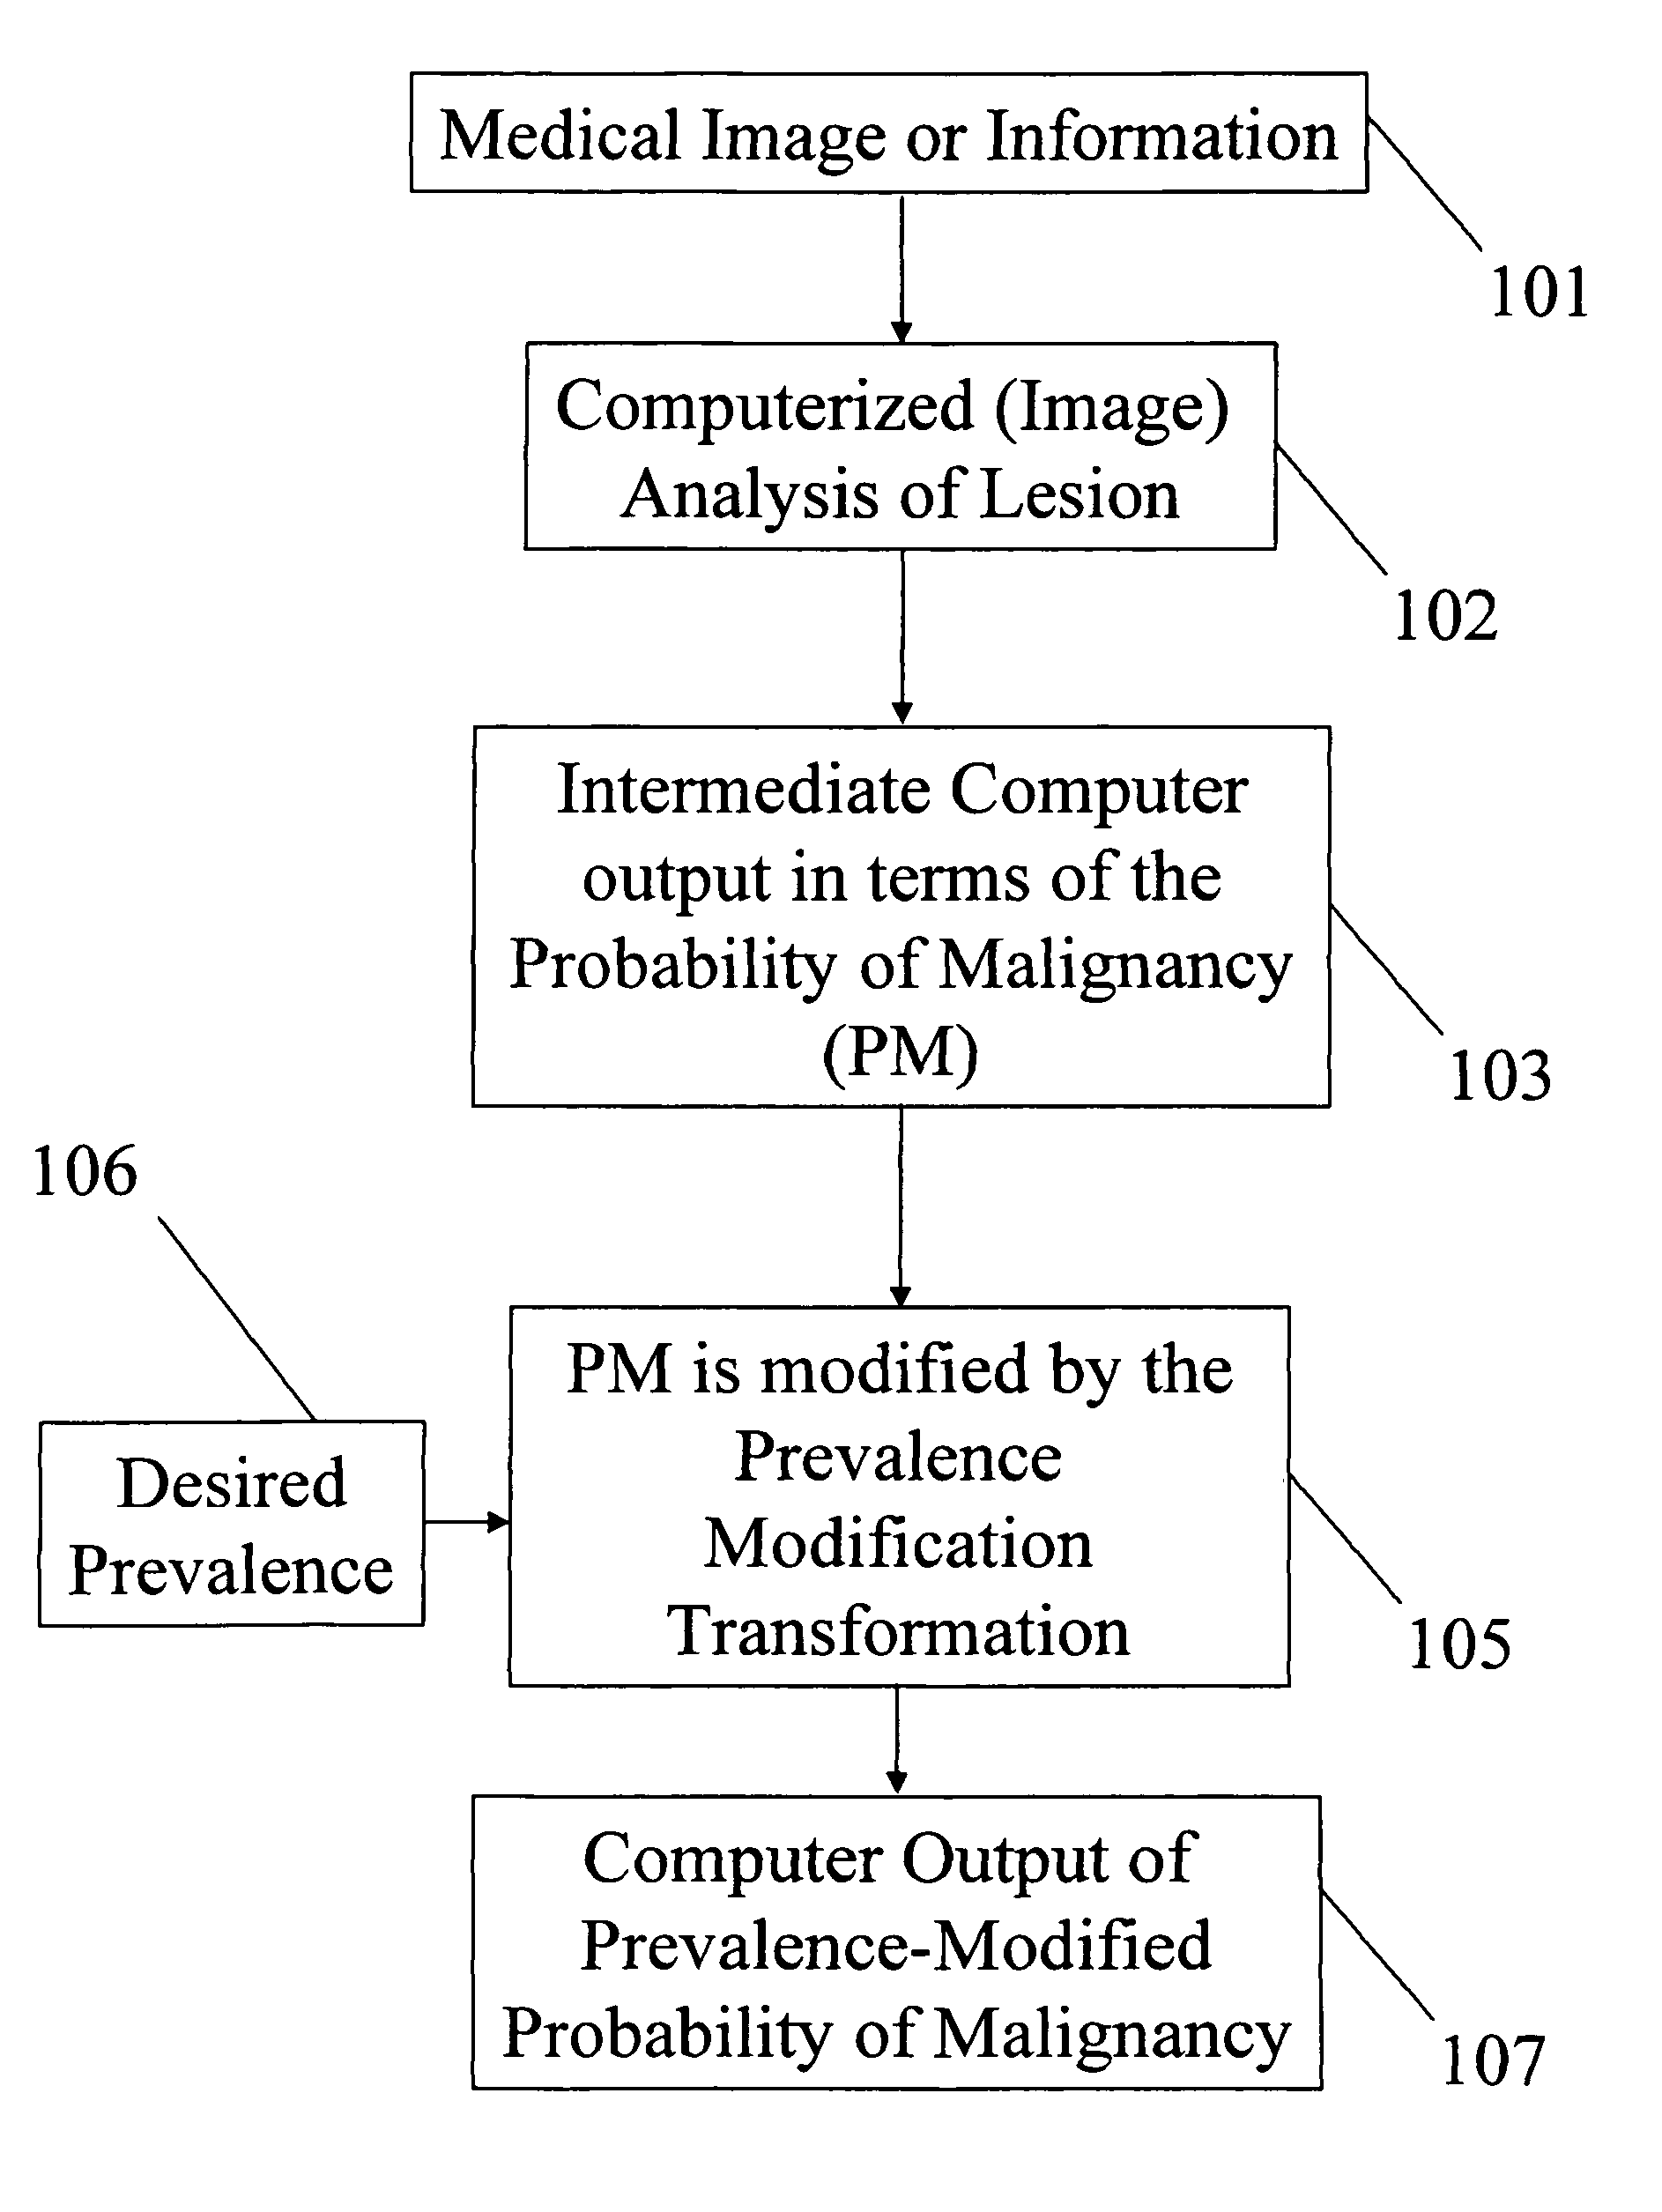 Method, system, and medium for prevalence-based computerized analysis of medical images and information